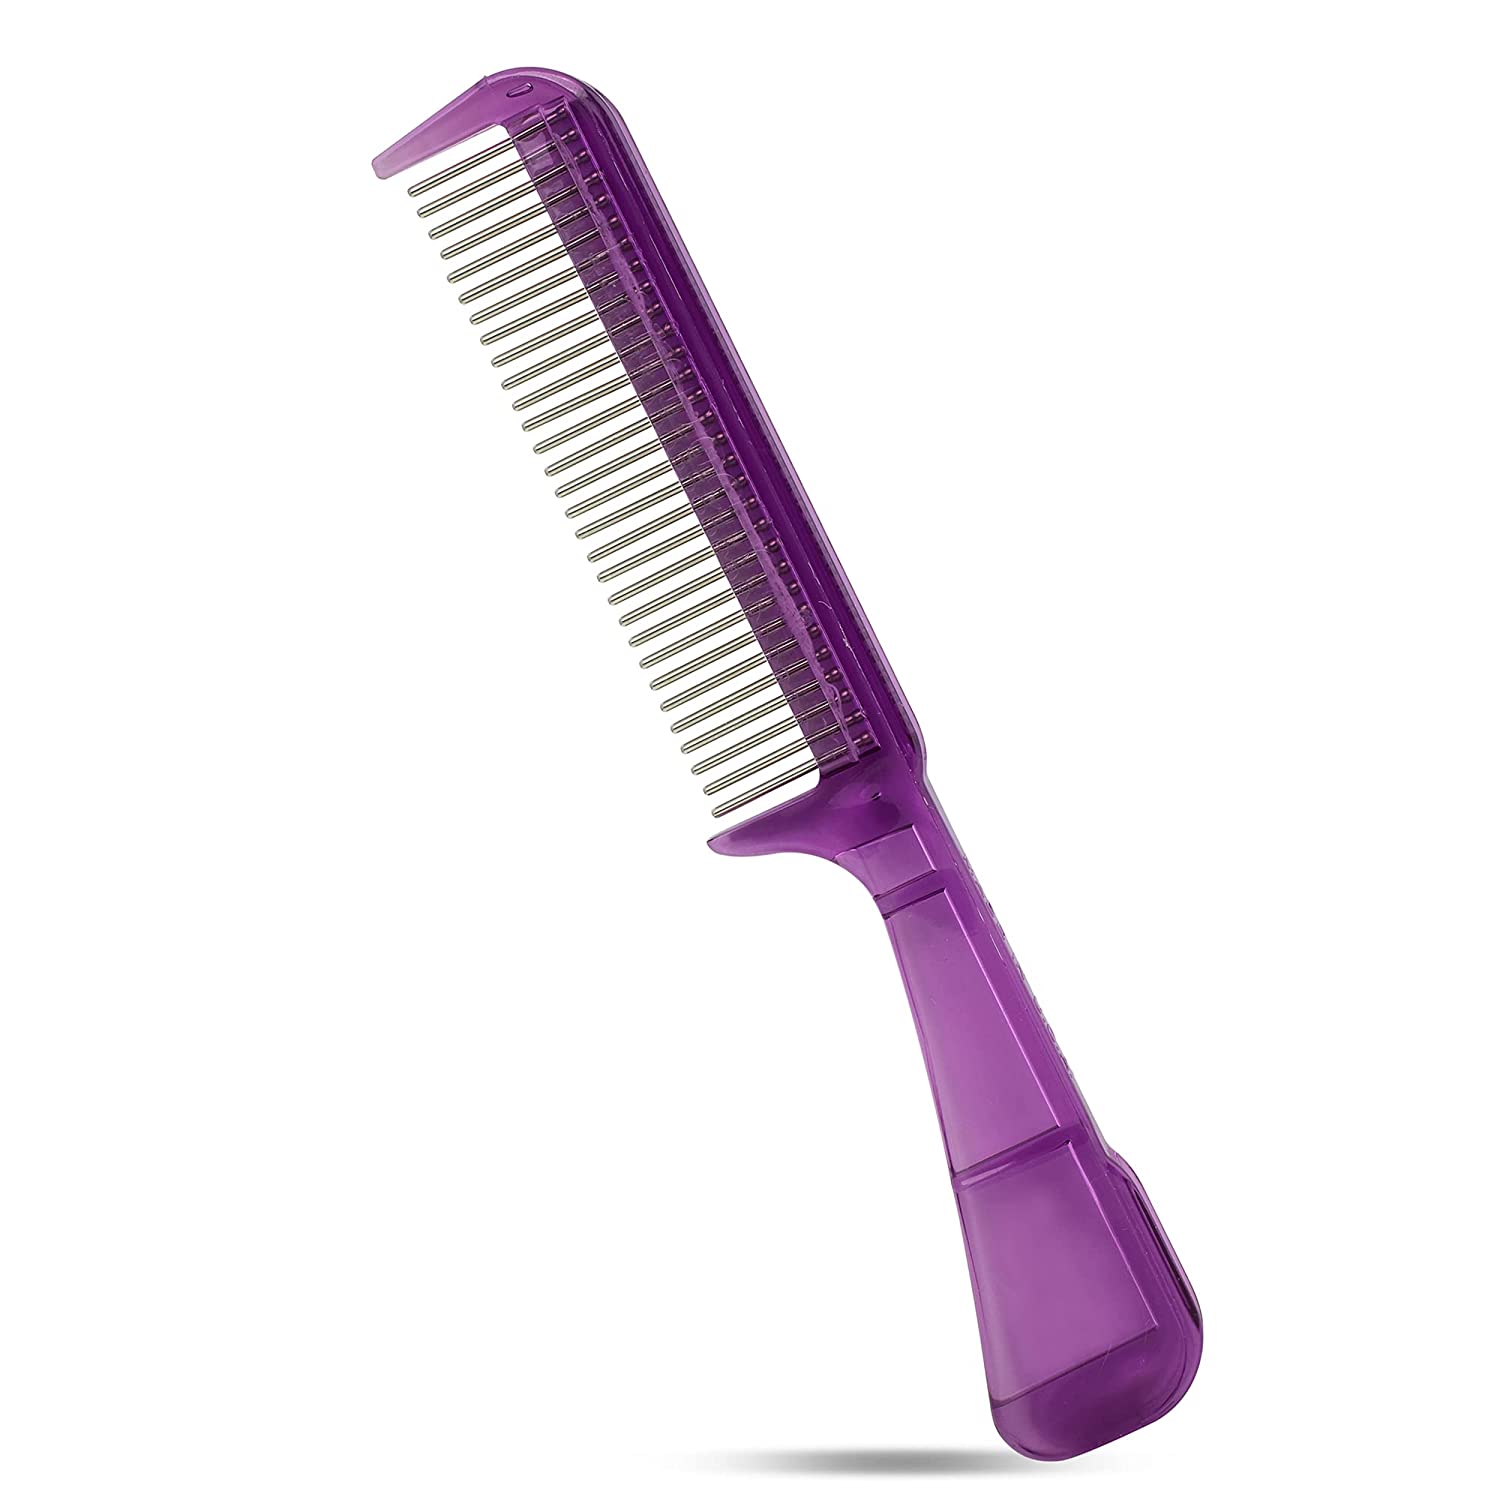 Best comb for hair loss